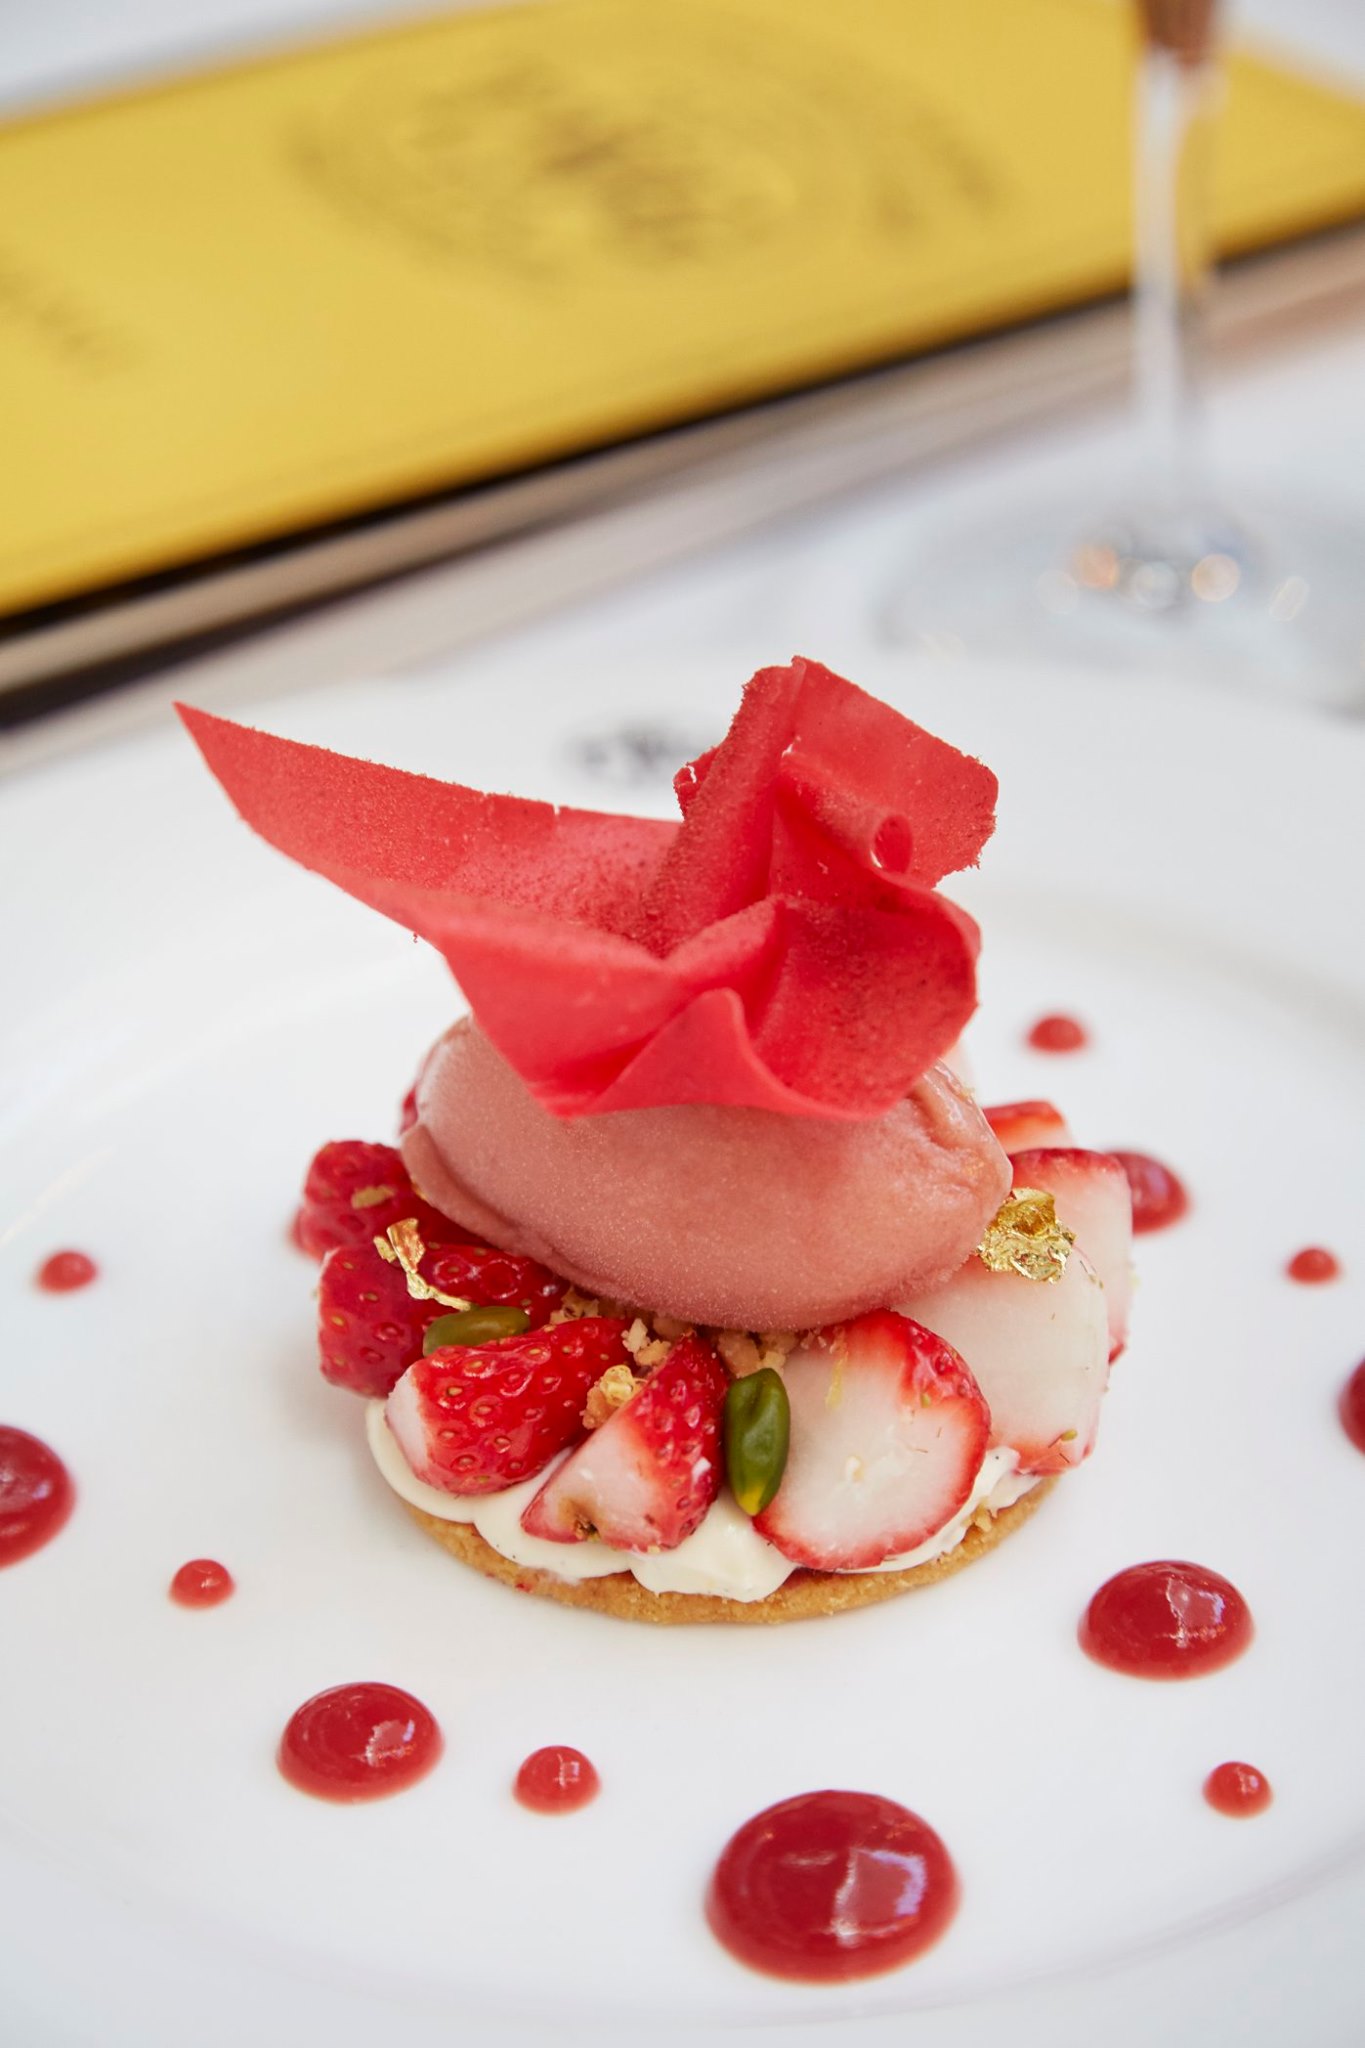 Pamper yourself with TWG Tea strawberry pistachio nut tart with mille-feuille cream and Silver Moon Tea infused strawberry jam, topped with a strawberry tuile and accompanied by a scoop of rhubarb sorbet. Available at any TWG Tea Salons in Singapore.